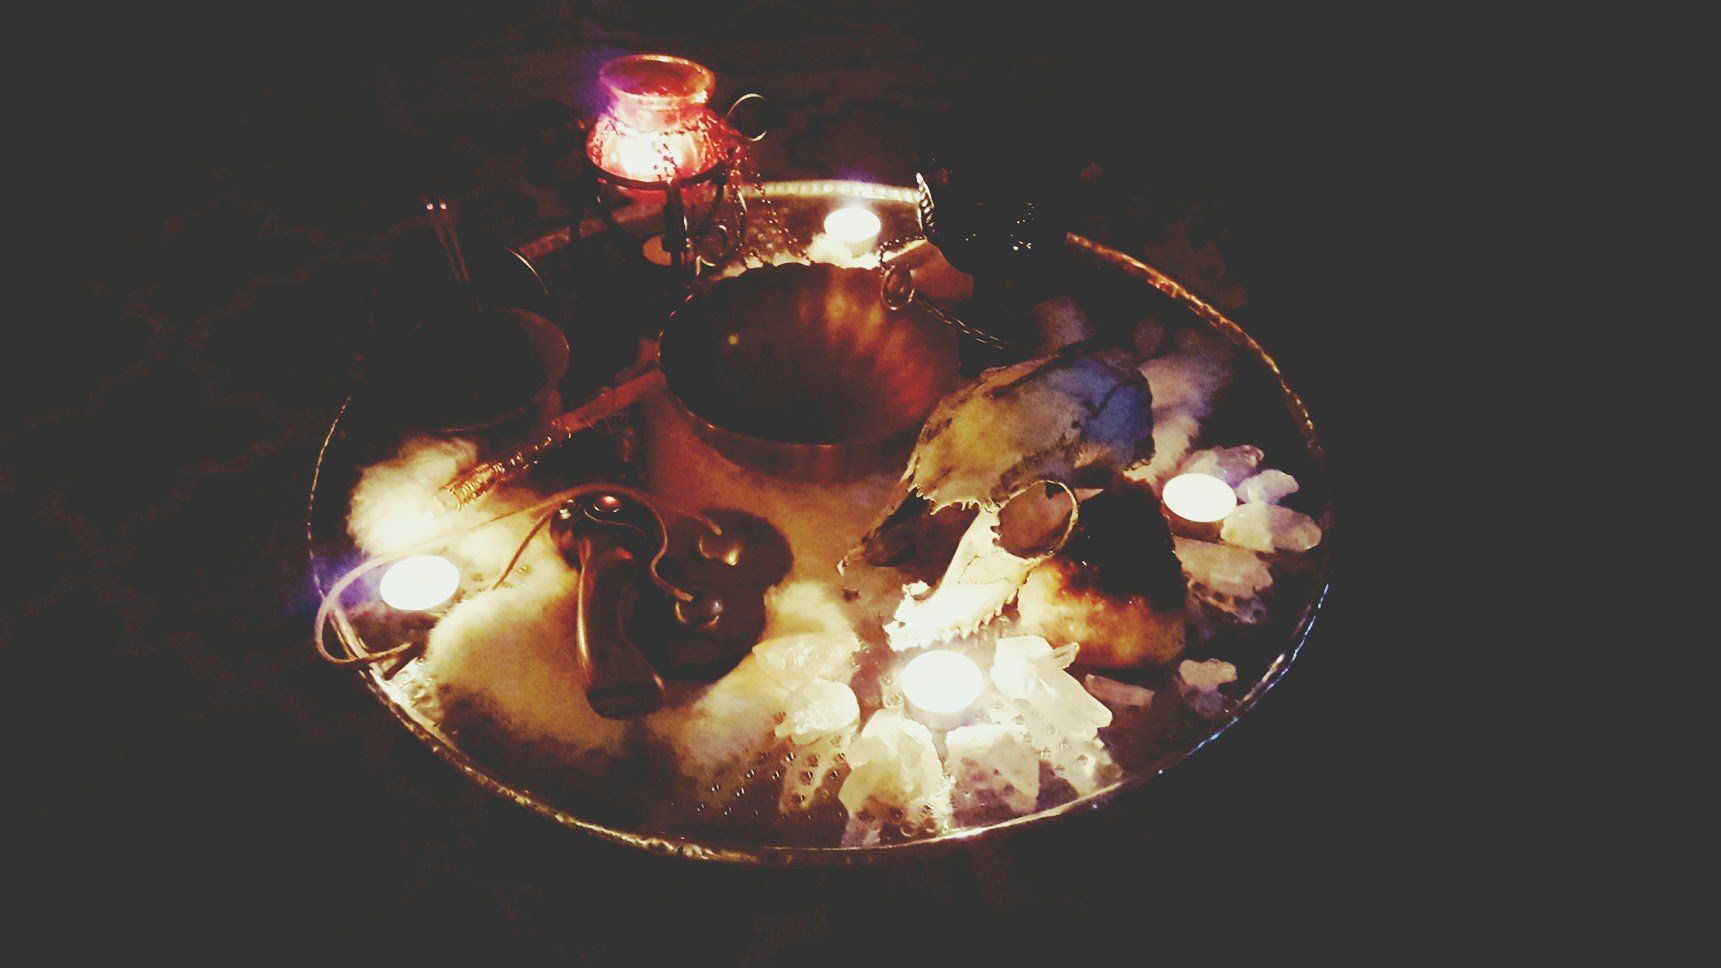 A bowl filled with candles and crystals in a dark room.